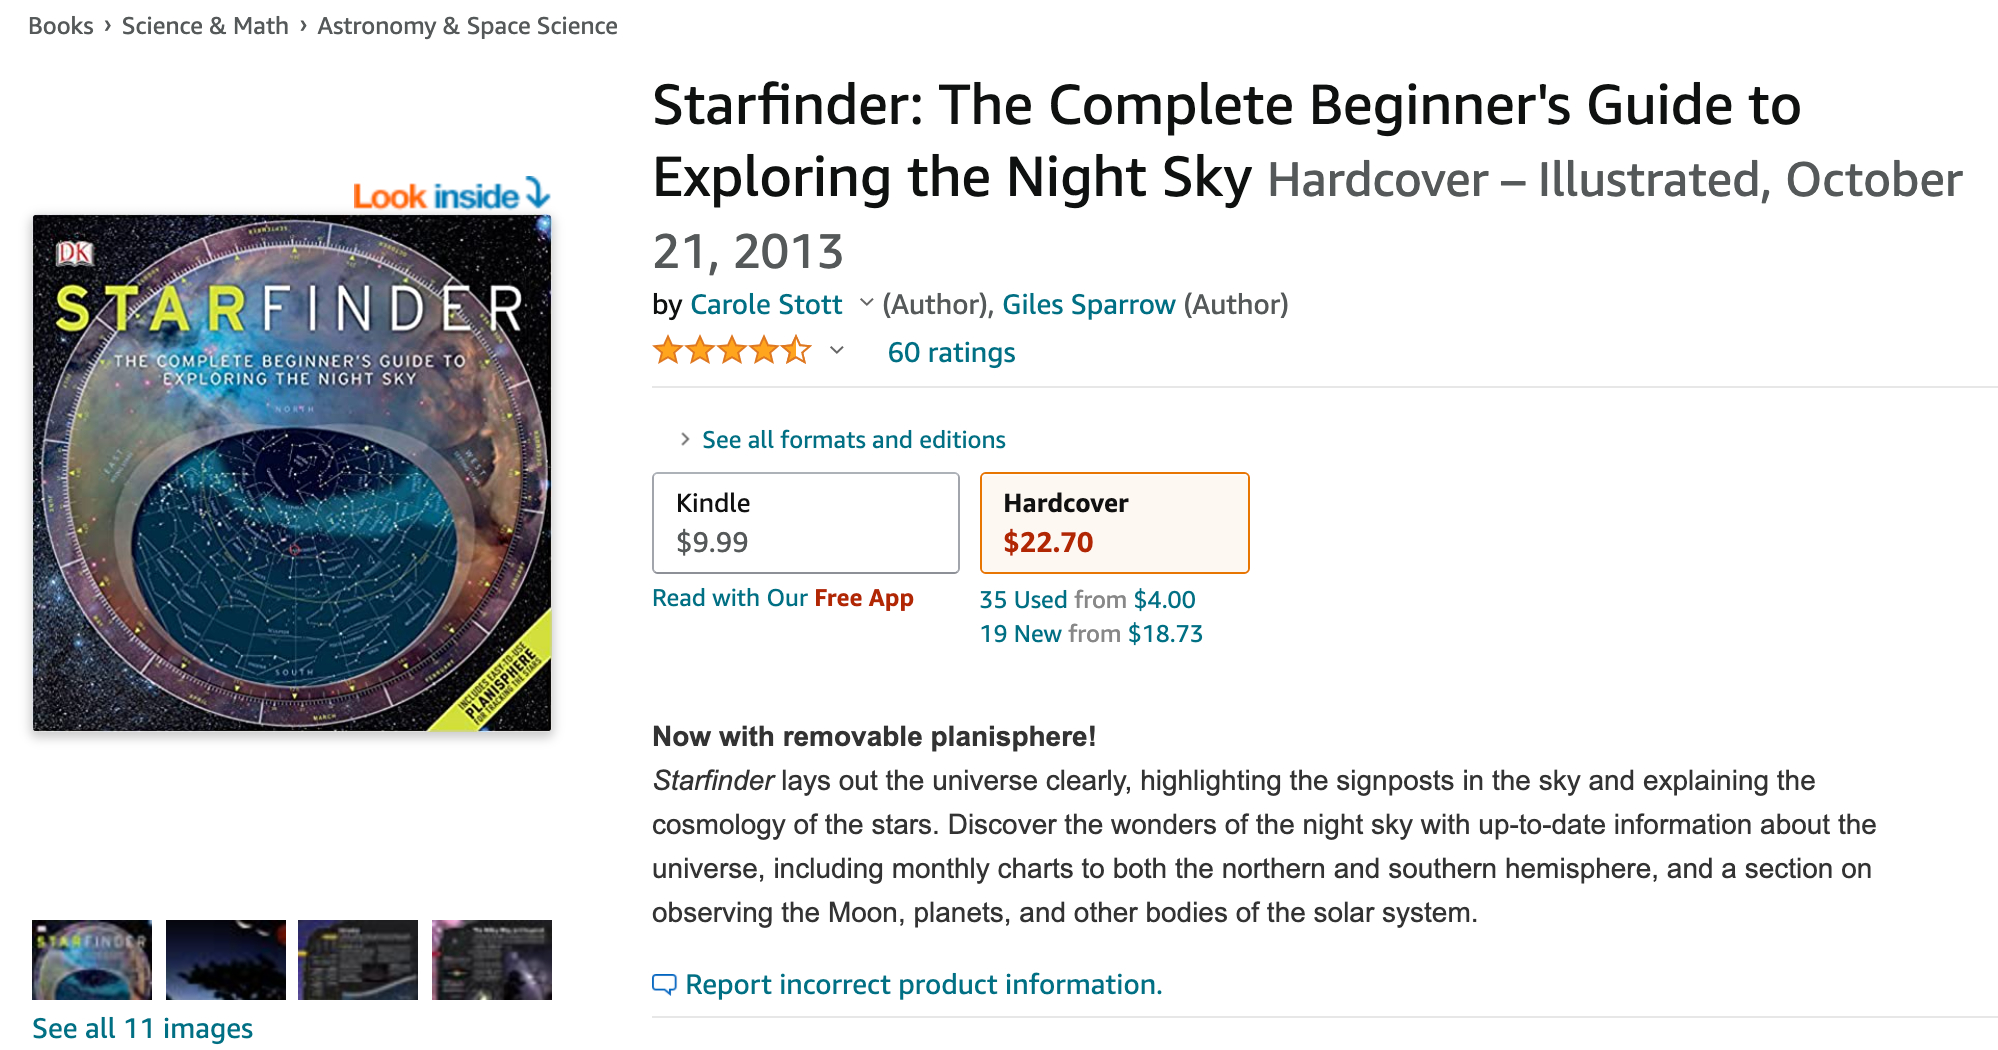 Starfinder- The Complete Beginner's Guide to Exploring the Night Sky.jpg